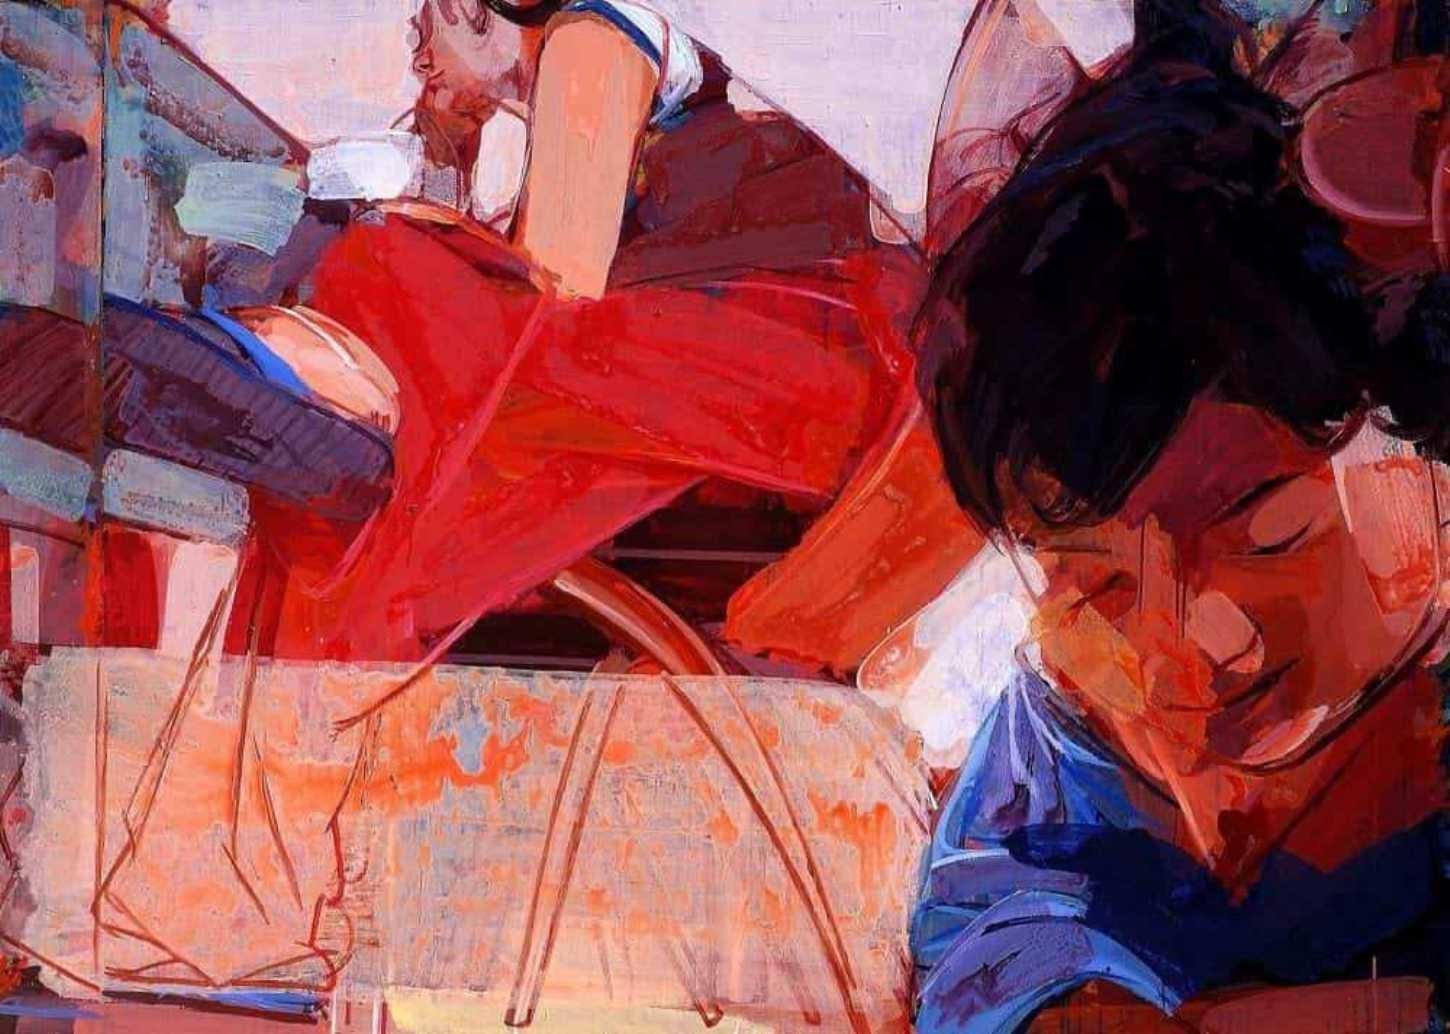 Uday Mondal Figurative Painting - Tango, Acrylic on canvas, Red, Brown, Blue, Indian Contemporary Artist"In Stock"